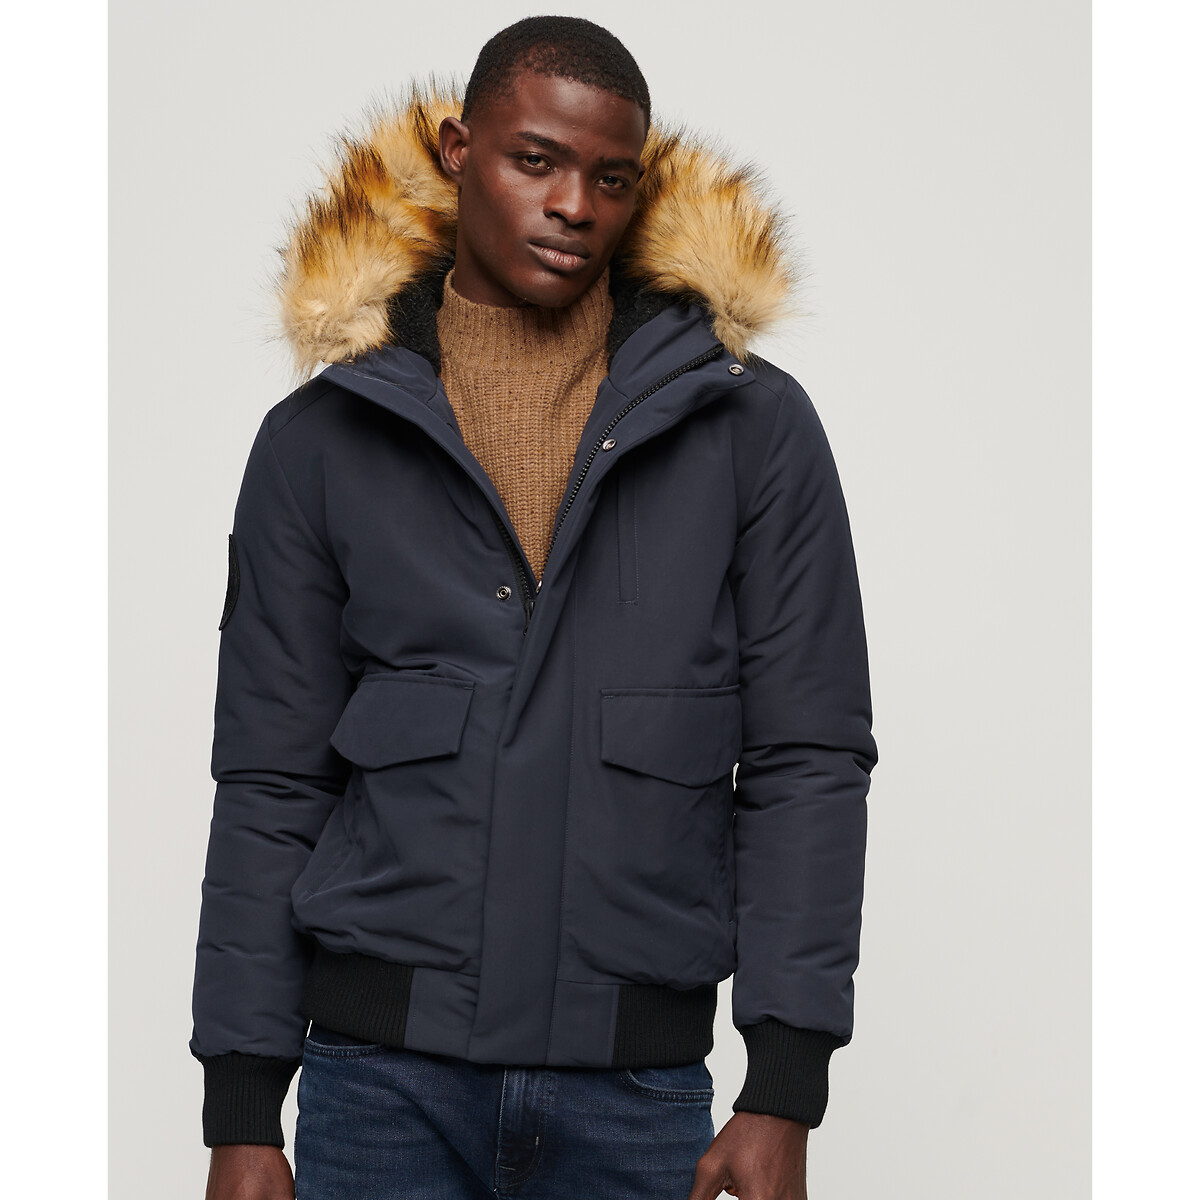 Everest Padded Bomber Jacket with Faux Fur Trim Hood